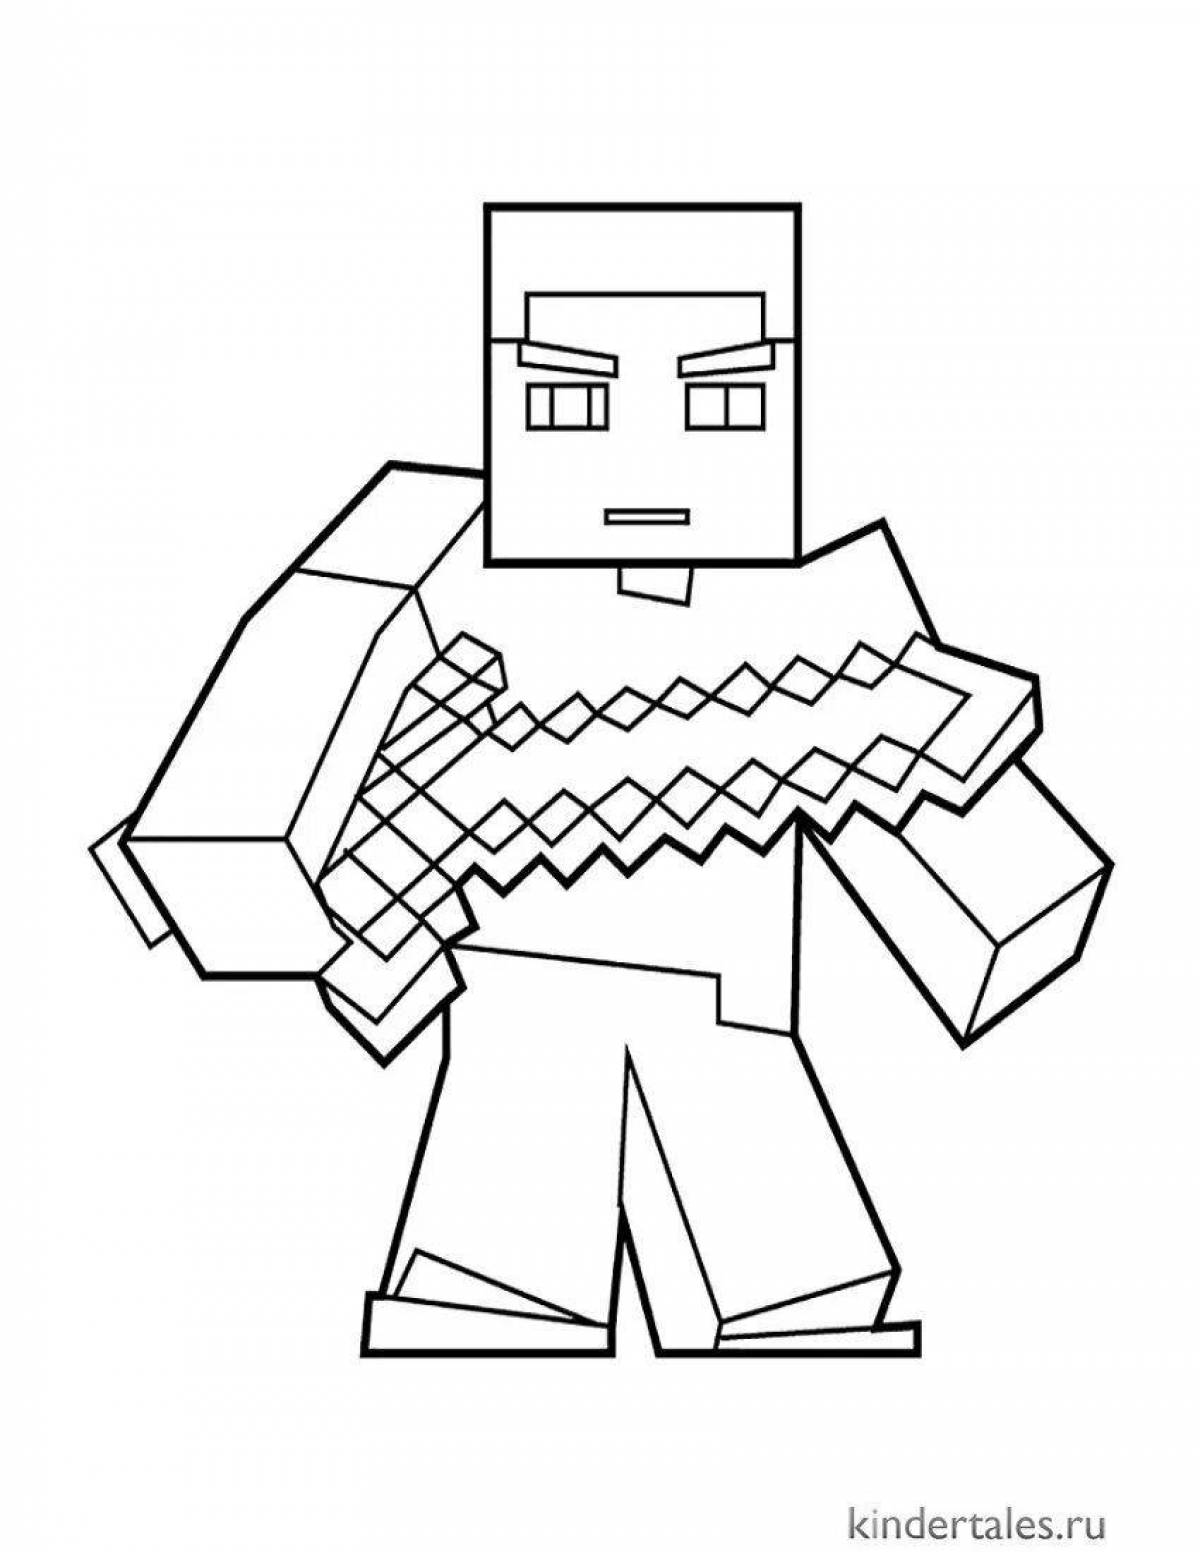 Adorable minecraft coloring book for boys 6-7 years old